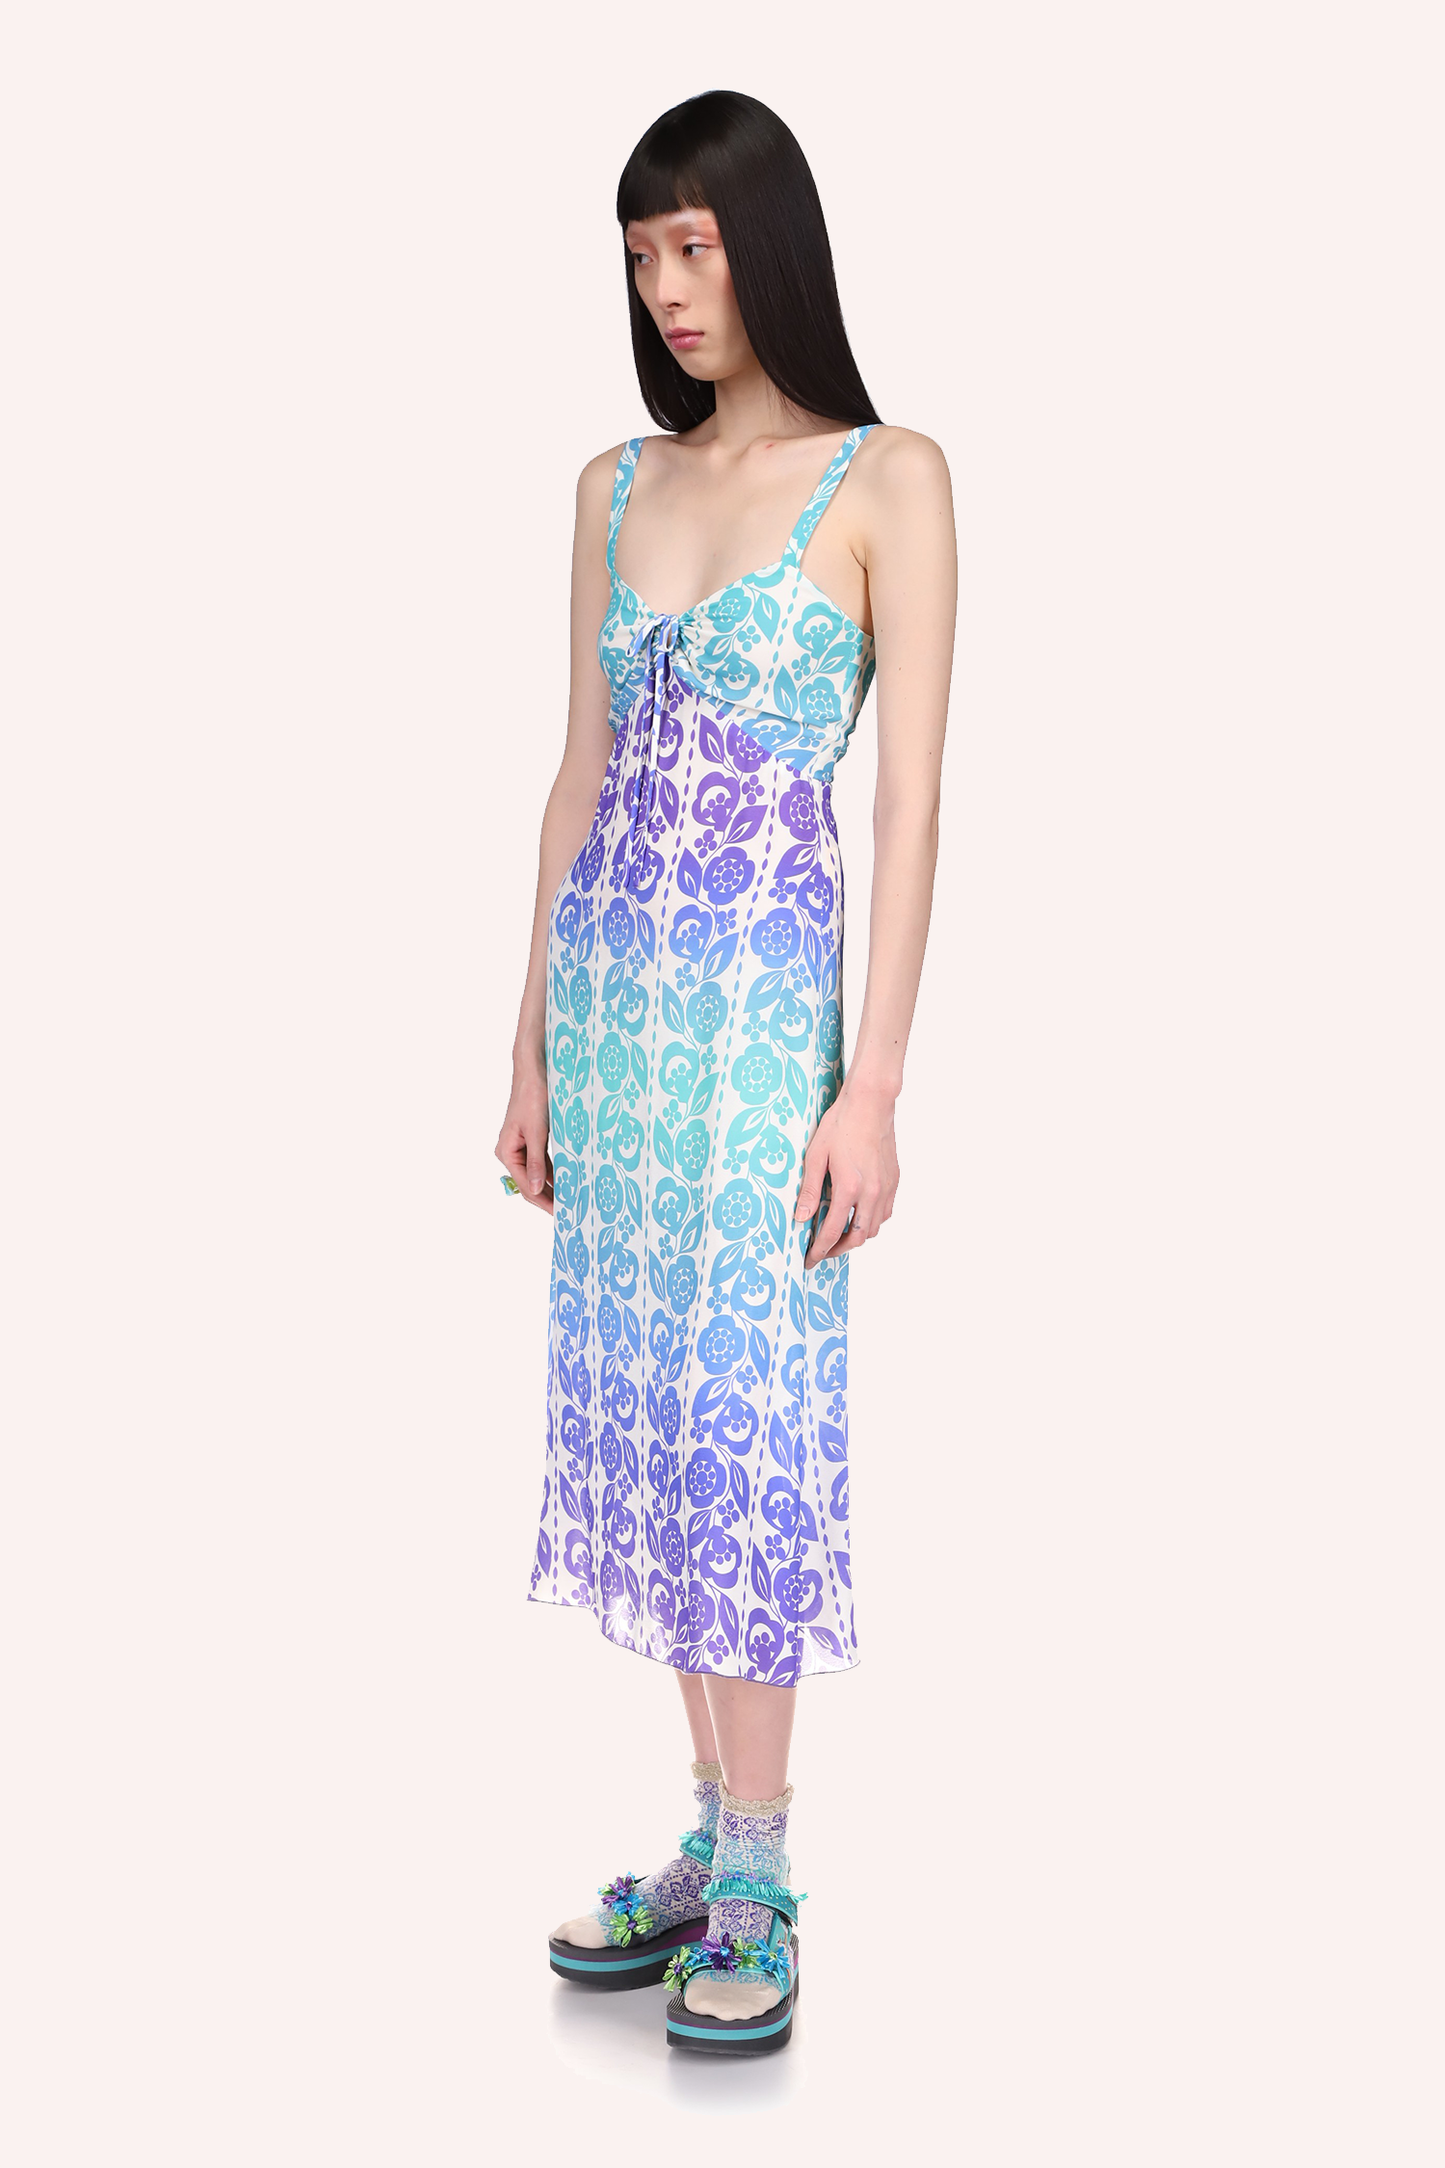 Radiant Ombre Slip Dress highlights your curves, the neckline is plunging